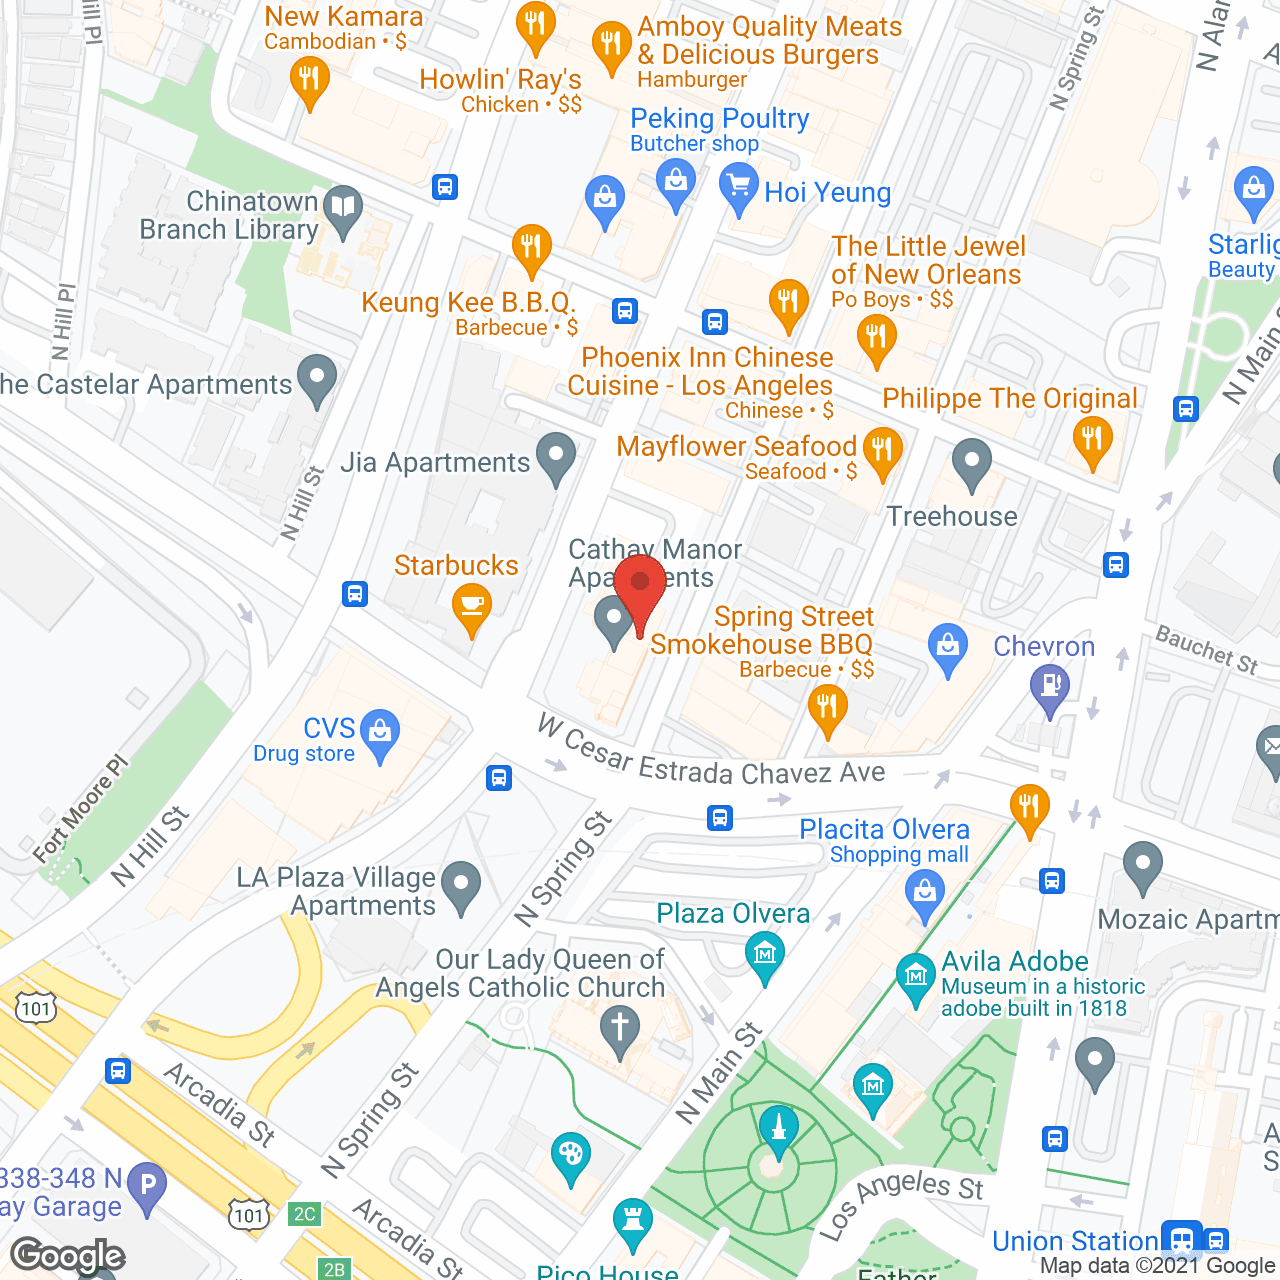 Cathay Manor Apartments in google map